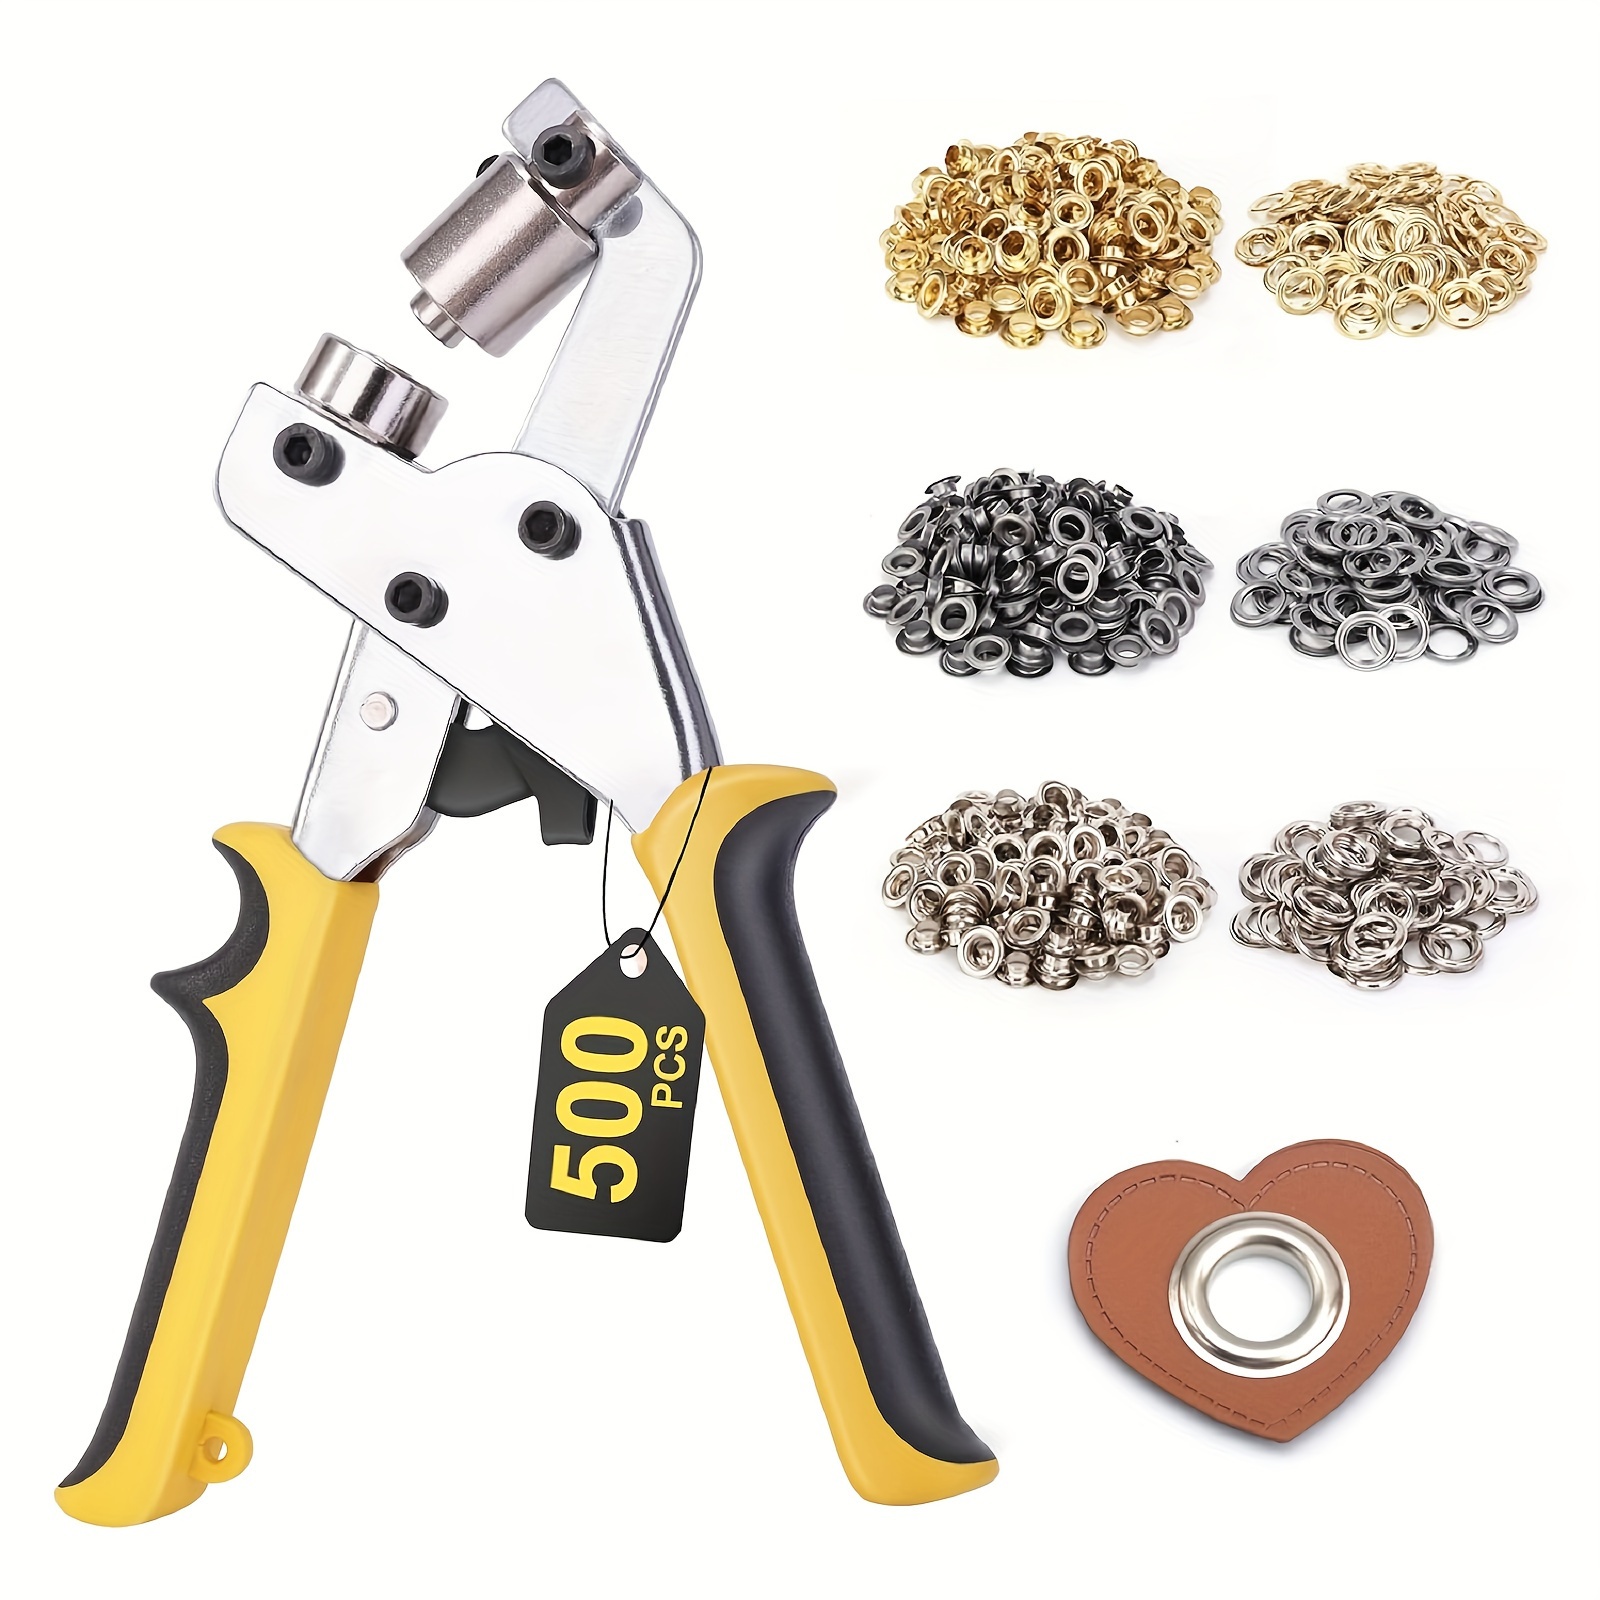 

3/8 Inches Grommet Tool Kit, Grommet Kit, 10mm Eyelets And Grommets Kit Press Pliers Punch Hole Maker Manual Handheld Machine With 500pcs Grommets ( 200 Golden+150 Silvery+150 Grey)